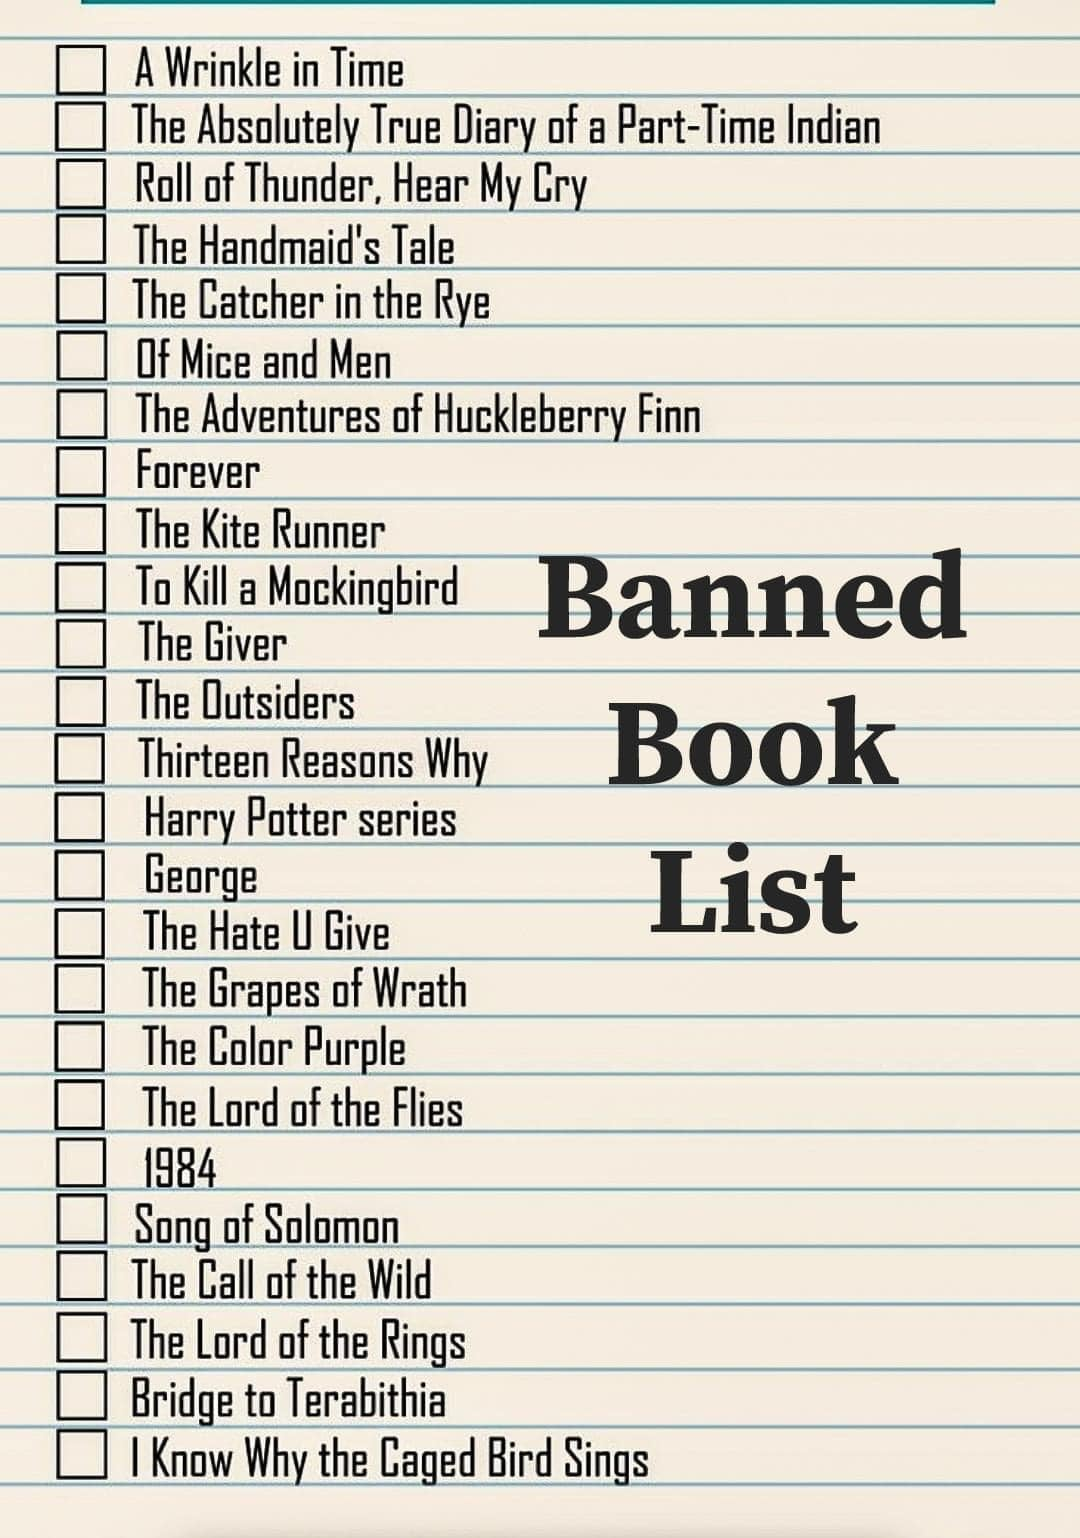 banned-book-list-greedy-grifters-idiot-parents-memes-imgflip